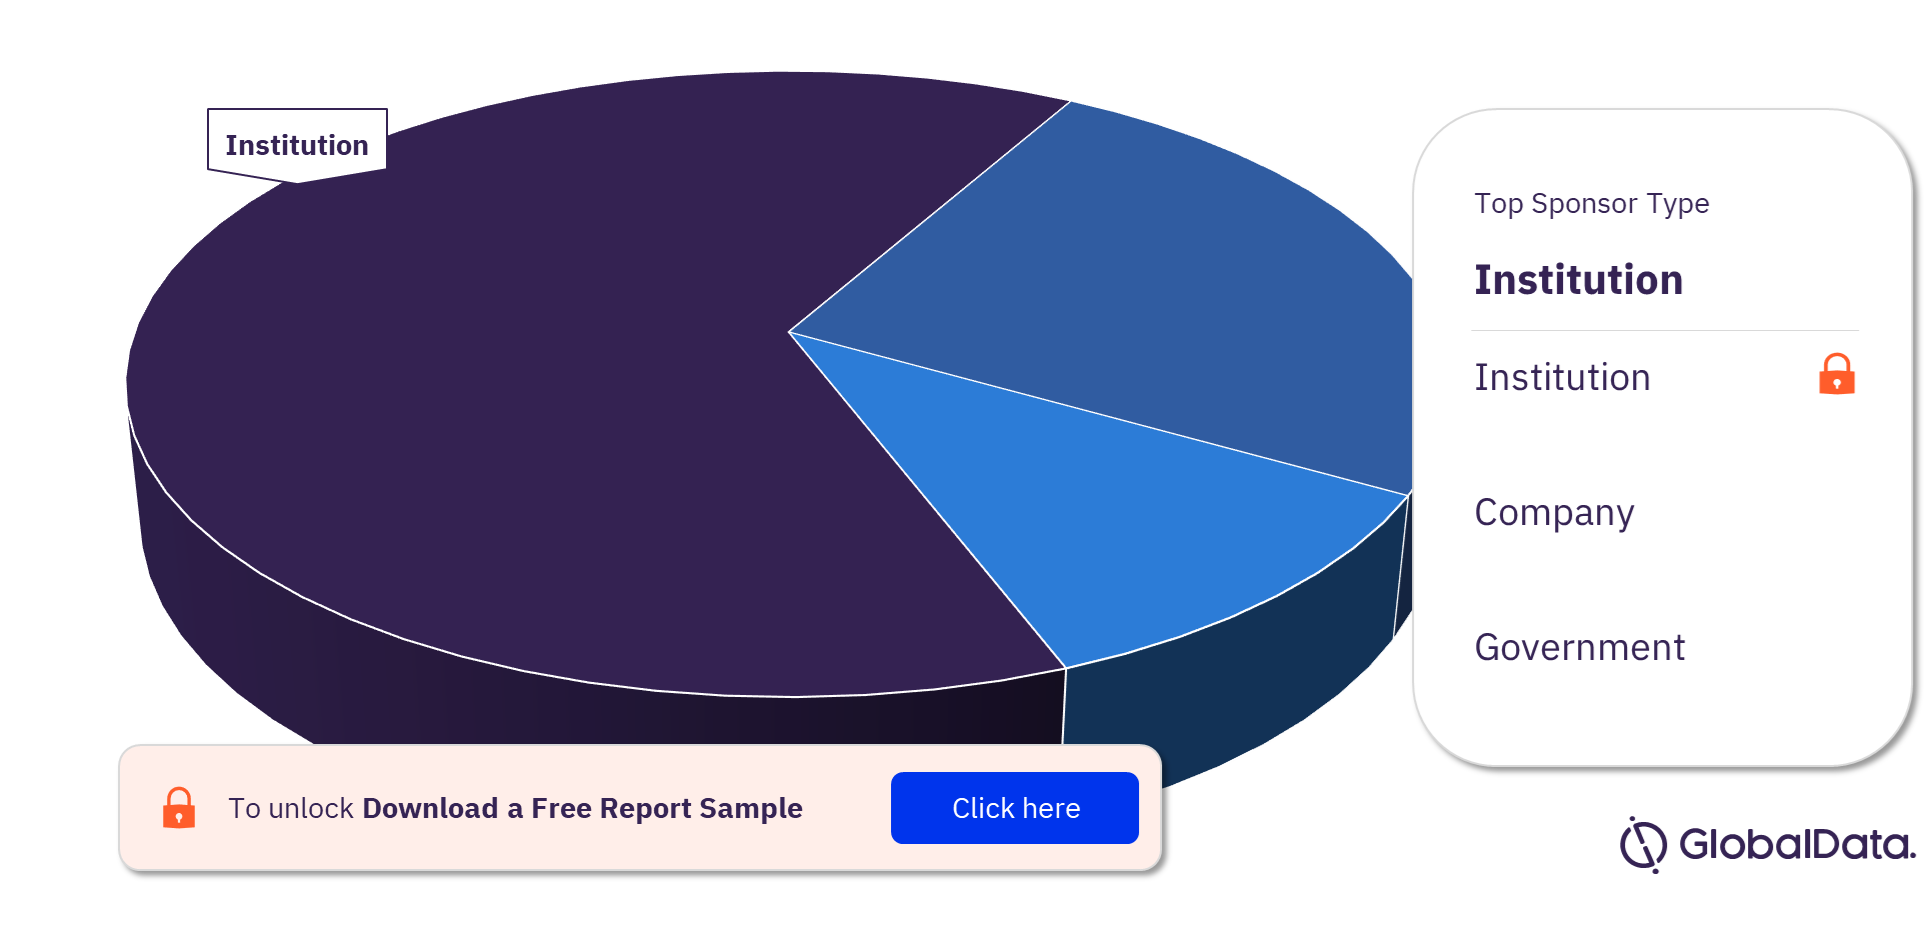 Acute Ischemic Stroke Clinical Trials Market Analysis by Sponsor Types